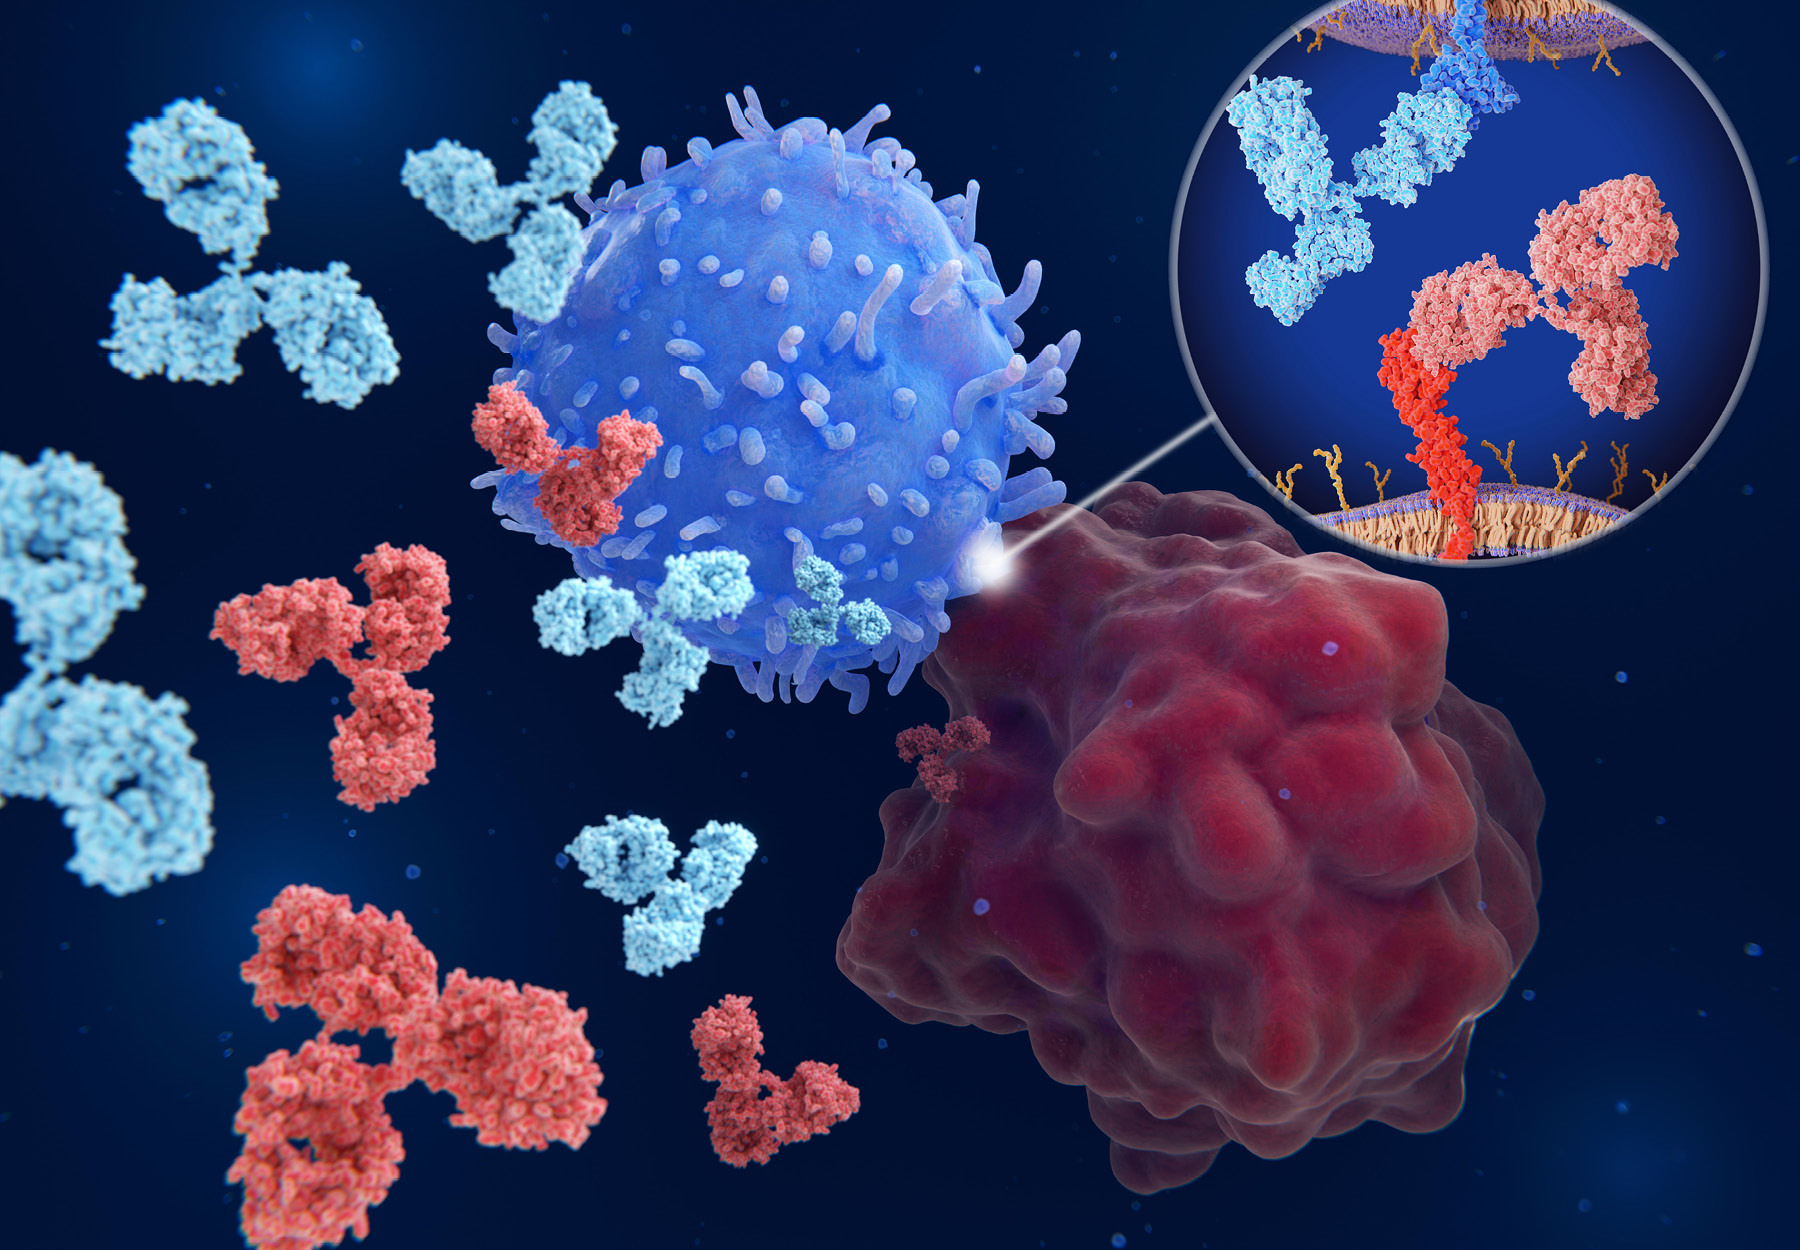 illustration of immune checkpoint inhibitors and cancer cell. Stock illustration.